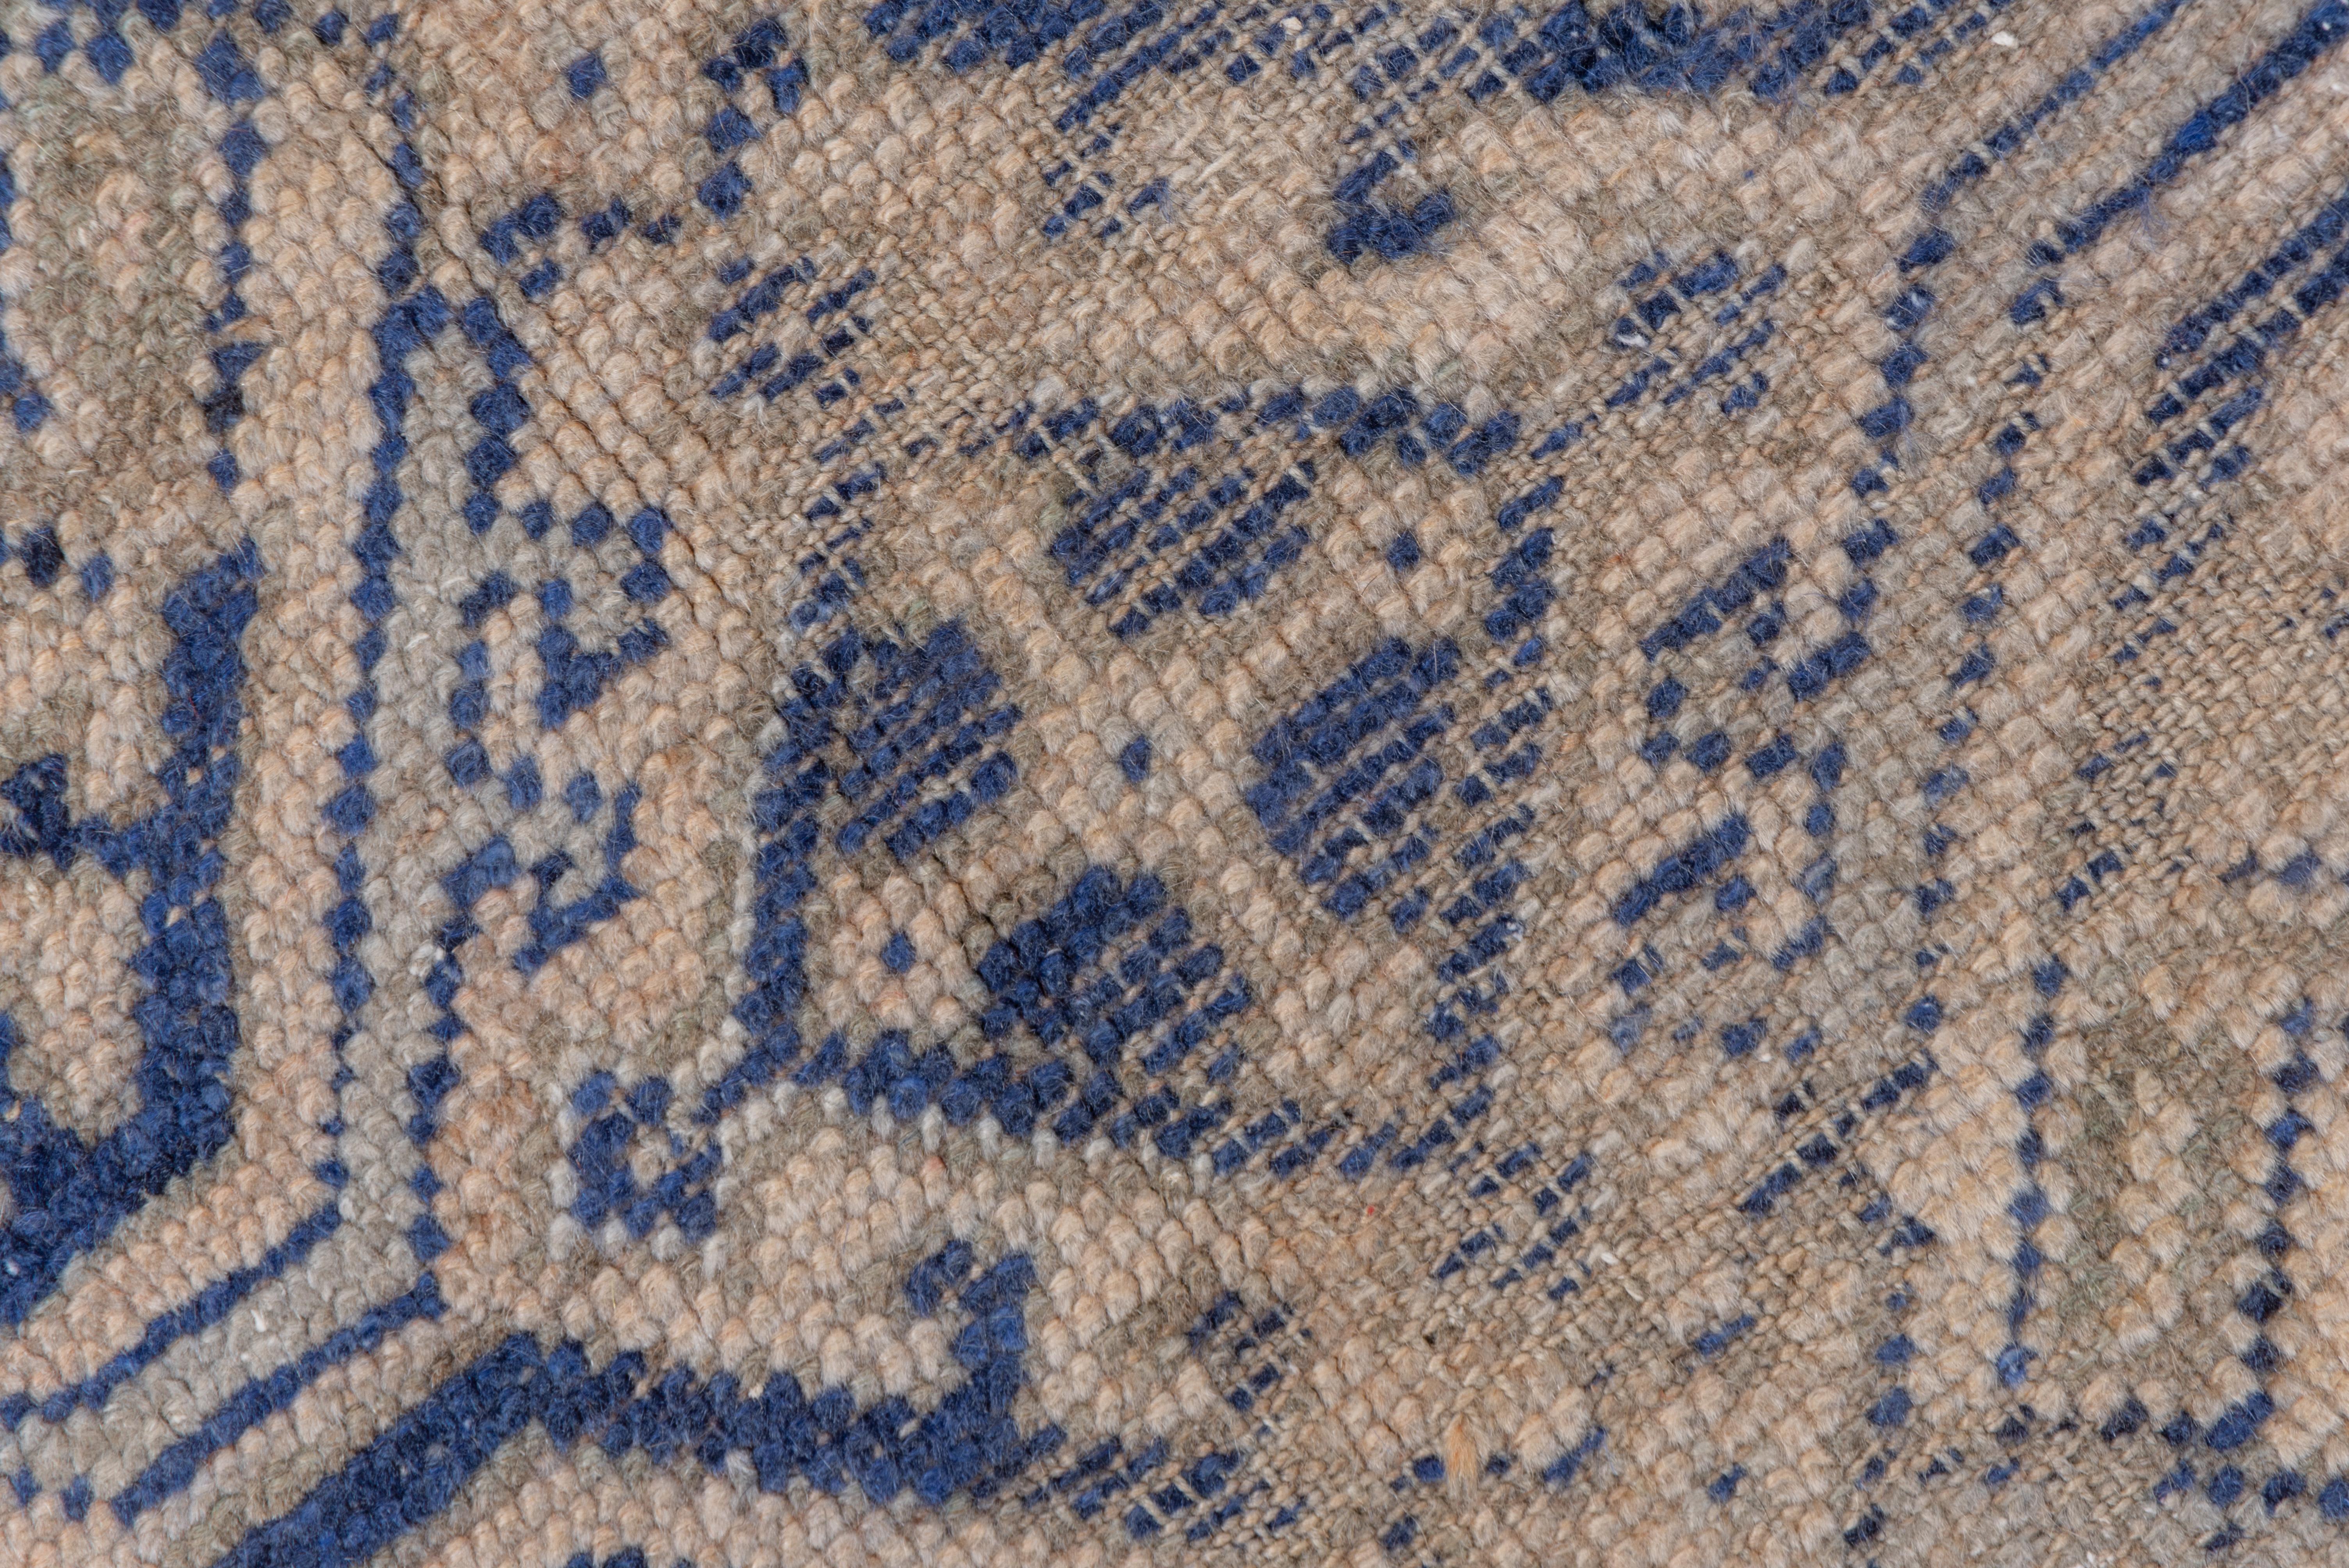 The sandy-straw ground displays a three motif Yaprak (Leaf) design in cobalt and sky blue. Usually this very old pattern appears on long runners or large carpets. This small format is uncommon.